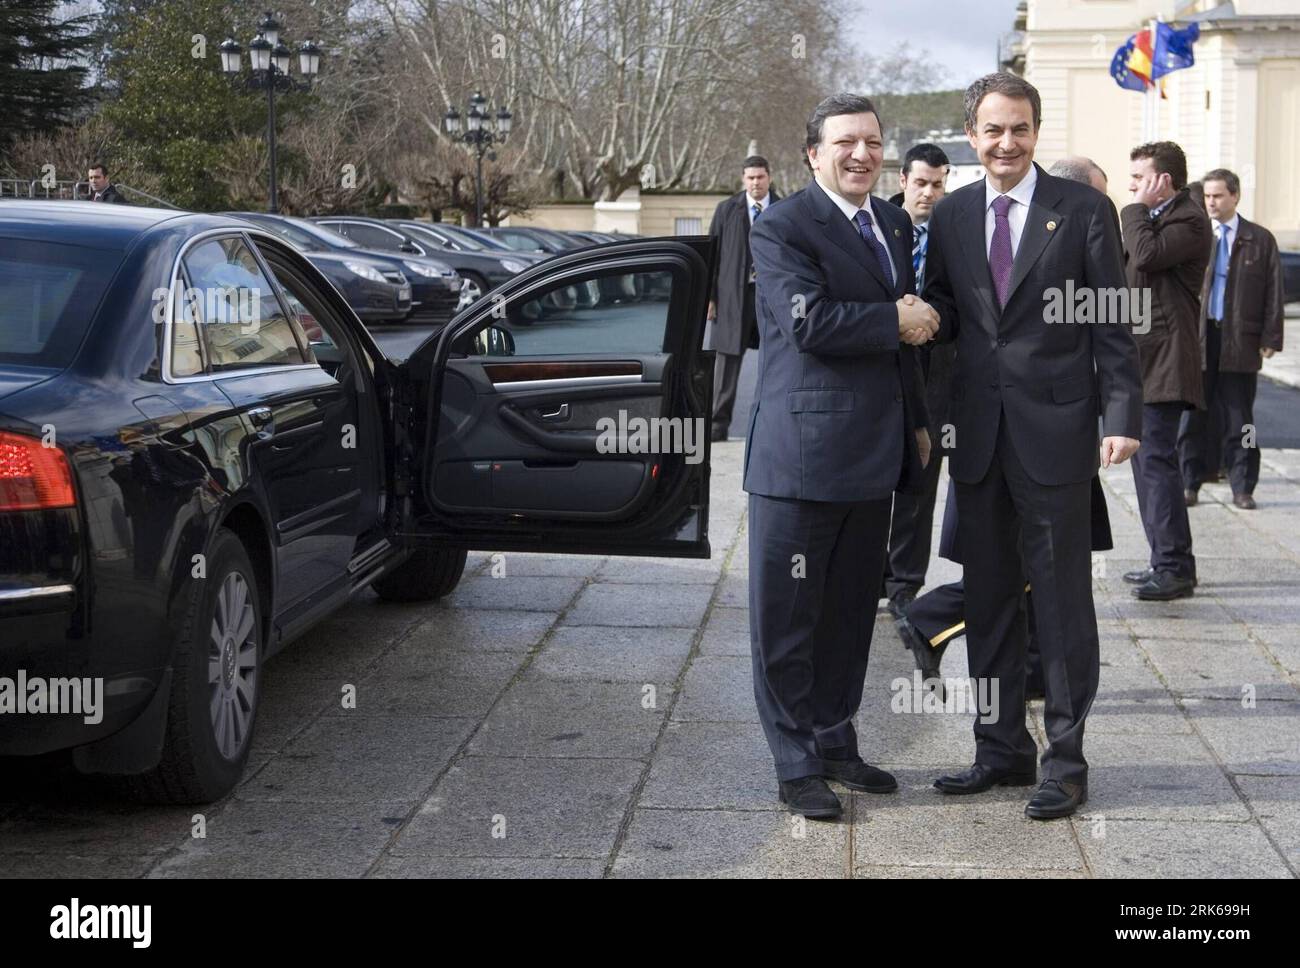 Bildnummer: 53814039  Datum: 23.02.2010  Copyright: imago/Xinhua  European Commission President Jose Manuel Barroso (L, front) shakes hands with Spanish Prime Minister Jose Luis Rodriguez Zapatero (R, front) in Madrid, Feb. 23, 2010. Barroso started his visit in Spain Tuesday. (Xinhua/Belen Diaz) (zhs) (1)SPAIN-EU-BARROSO-VISIT PUBLICATIONxNOTxINxCHN People Politik kbdig xkg 2010 quer    Bildnummer 53814039 Date 23 02 2010 Copyright Imago XINHUA European Commission President Jose Manuel Barroso l Front Shakes Hands With Spanish Prime Ministers Jose Luis Rodriguez Zapatero r Front in Madrid Feb Stock Photo